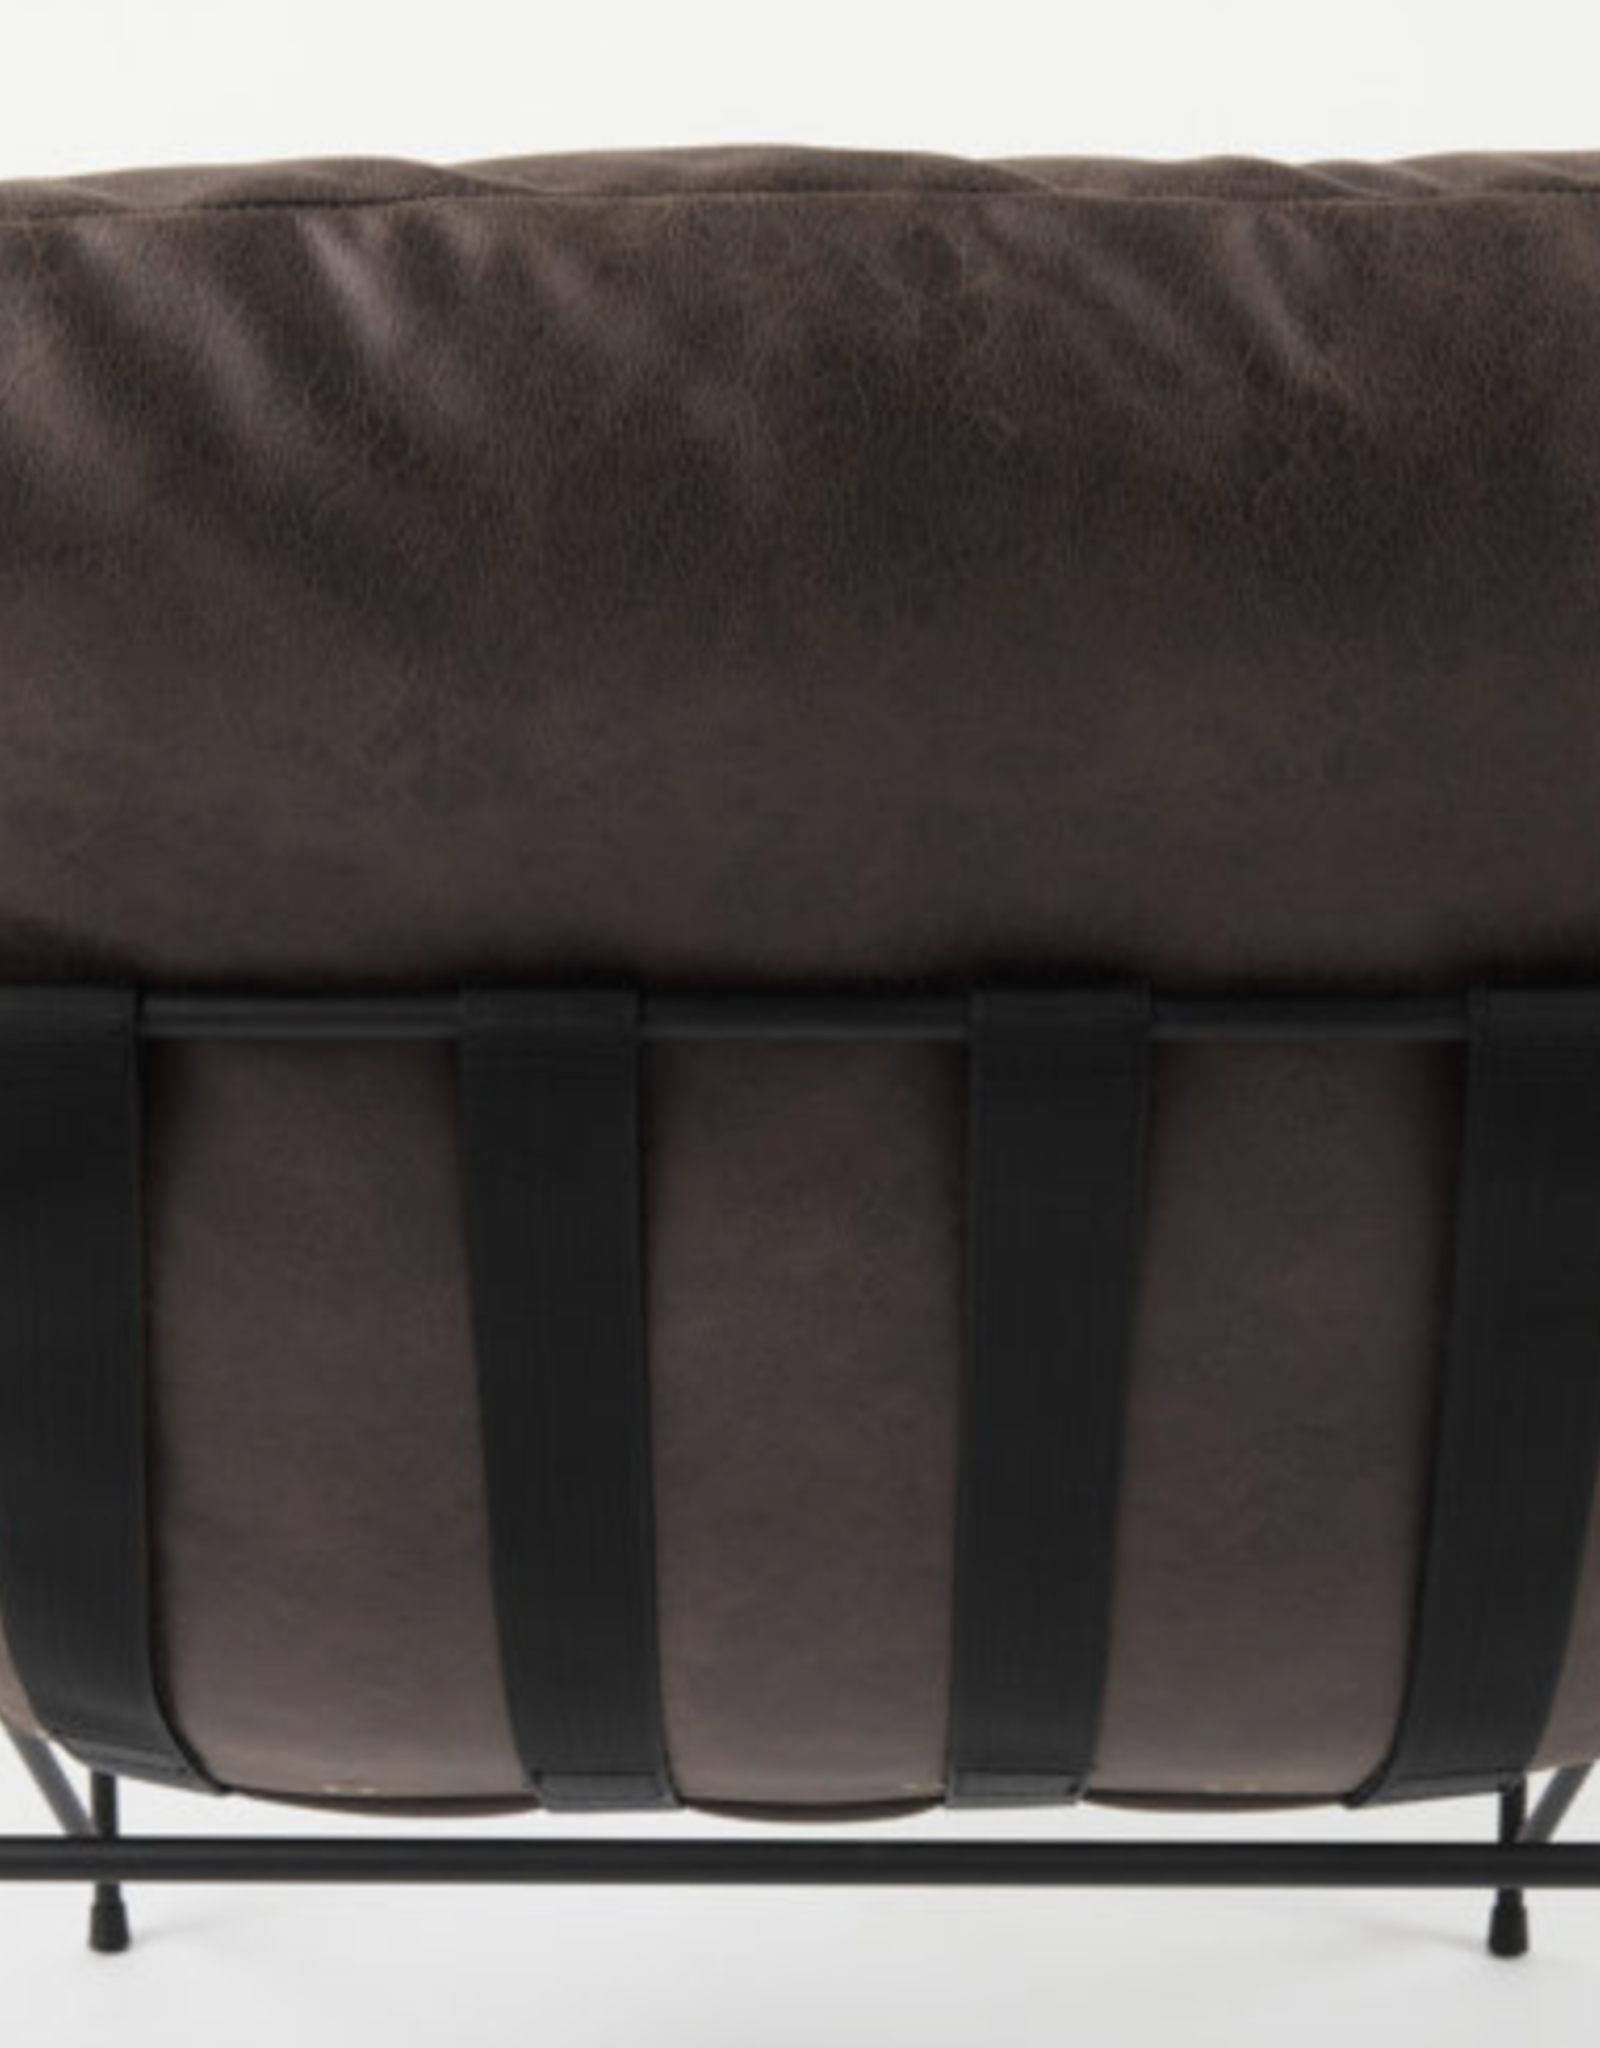 Leonidas Brown Faux Leather Chair